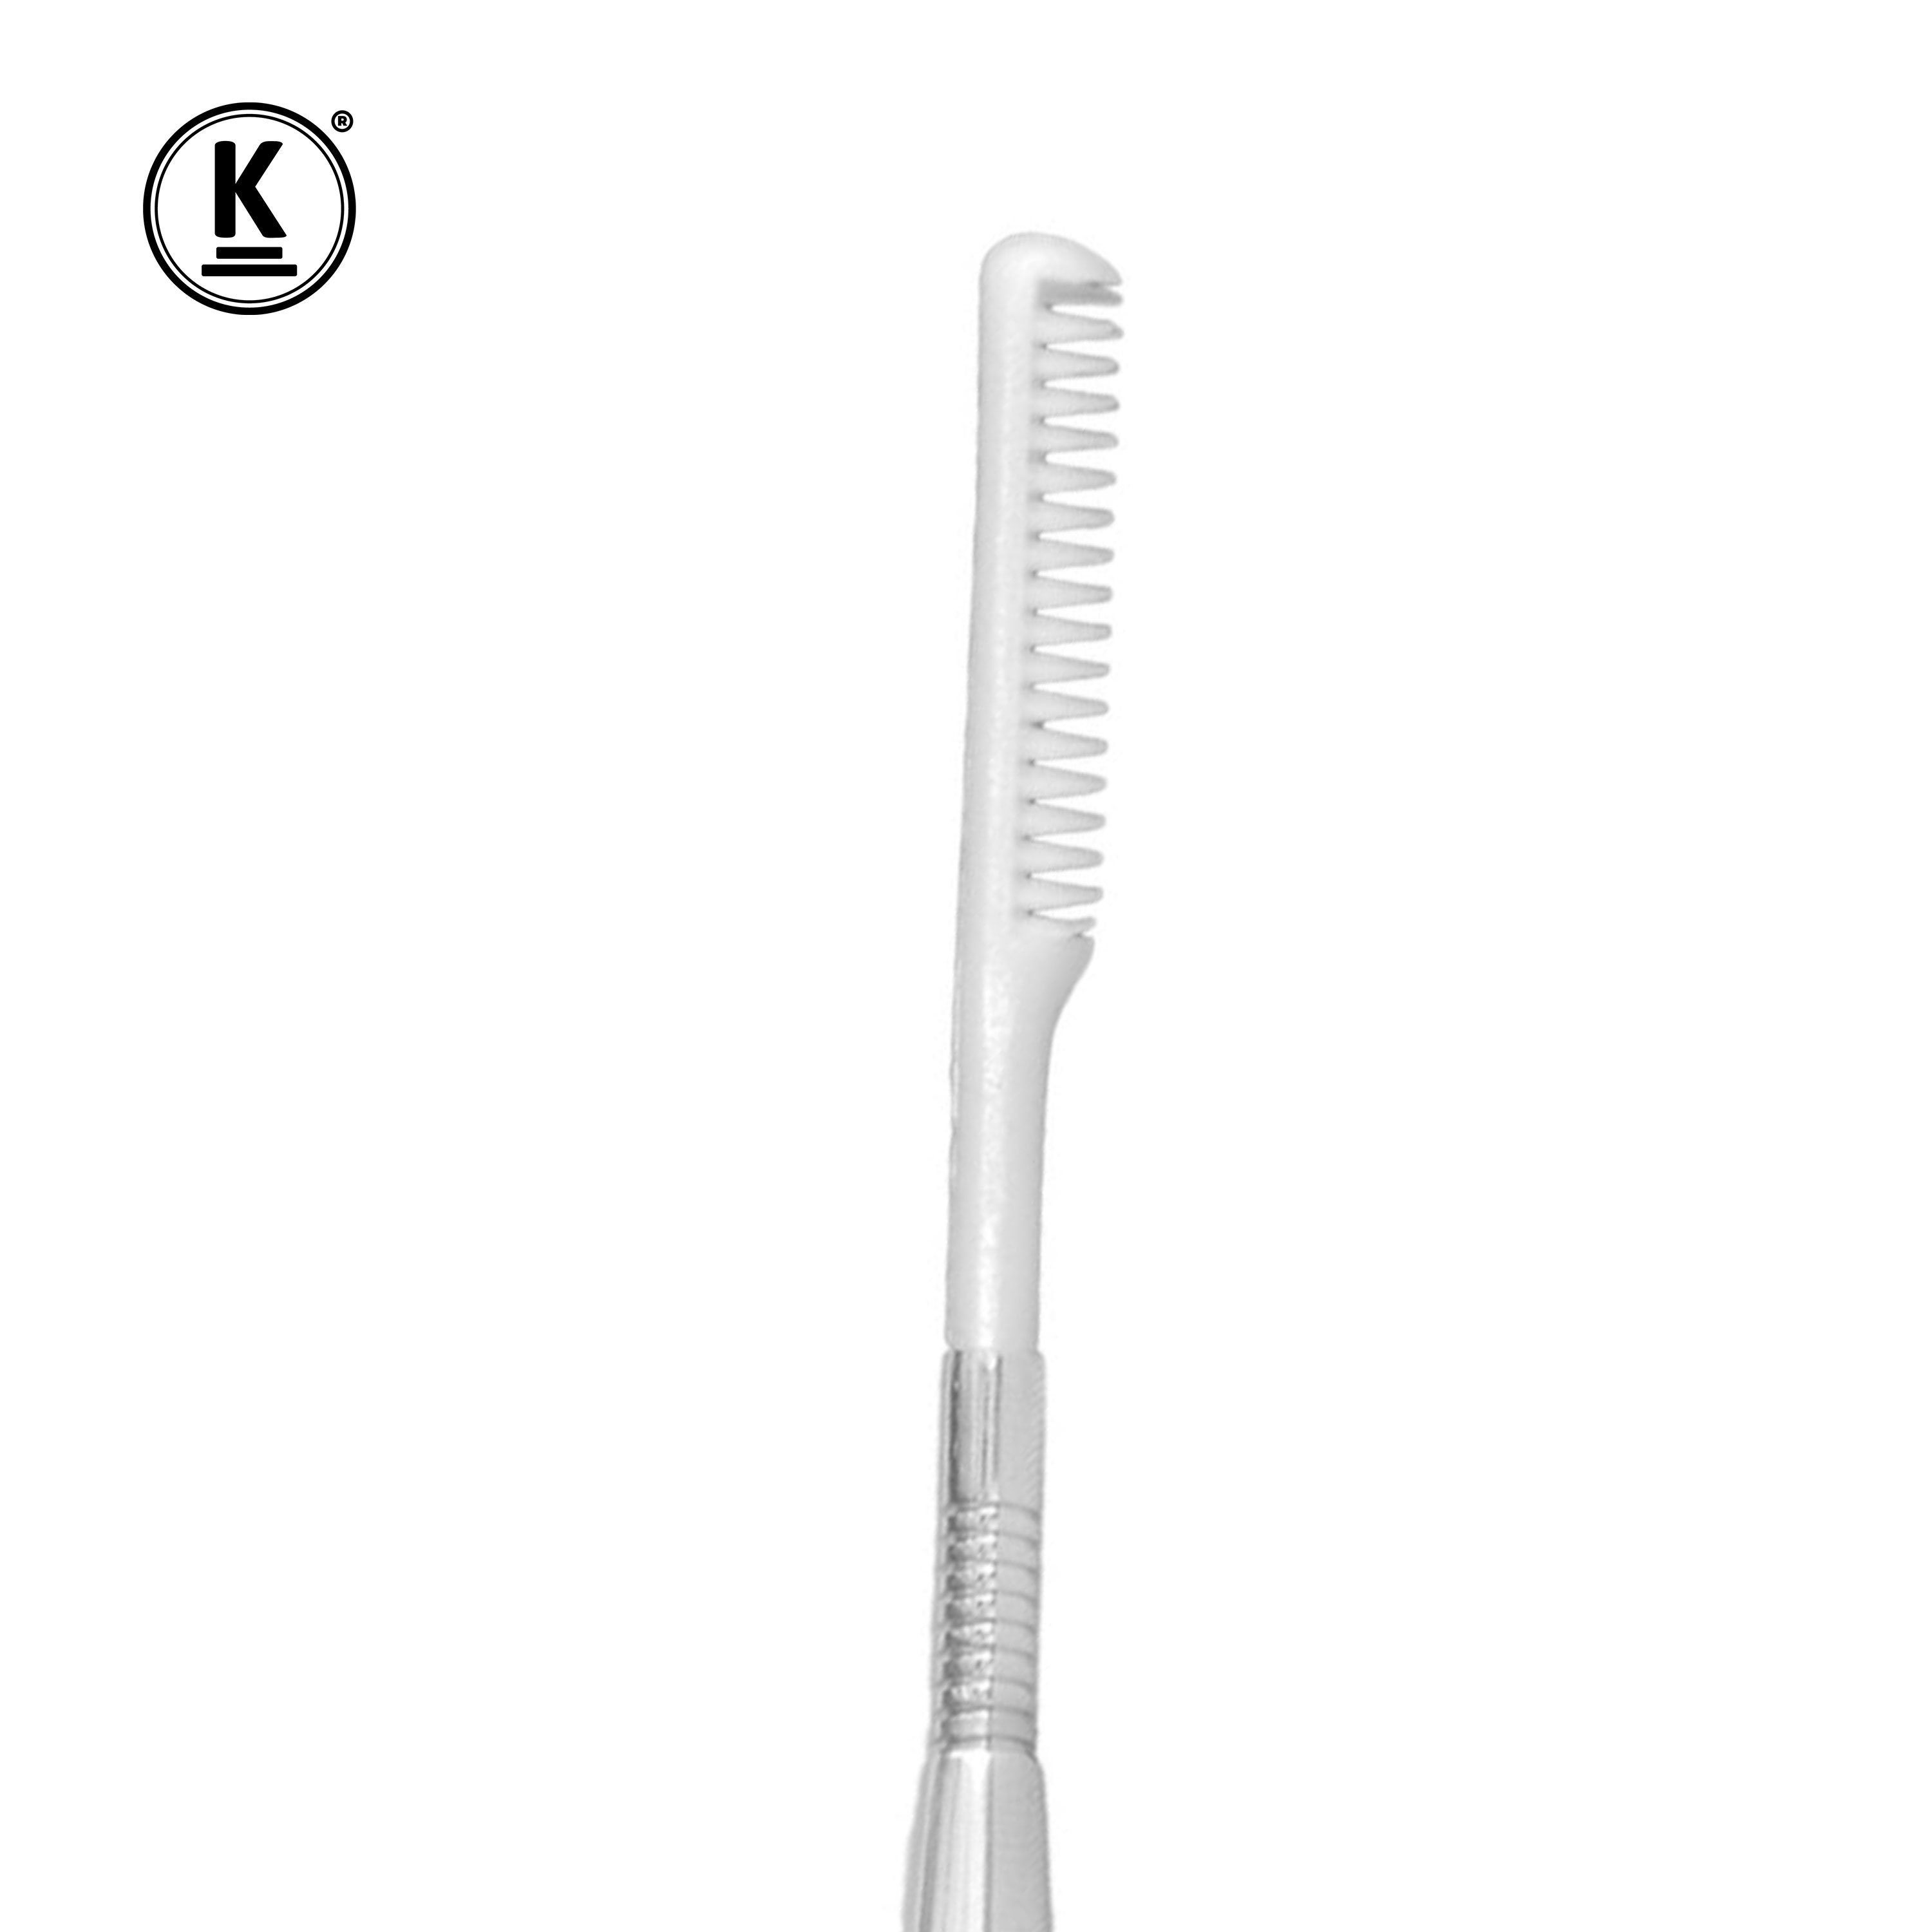 K-Pro Wimpernkamm - Lifting Kamm Wimpernlifting Wimpern Tool & Seperator